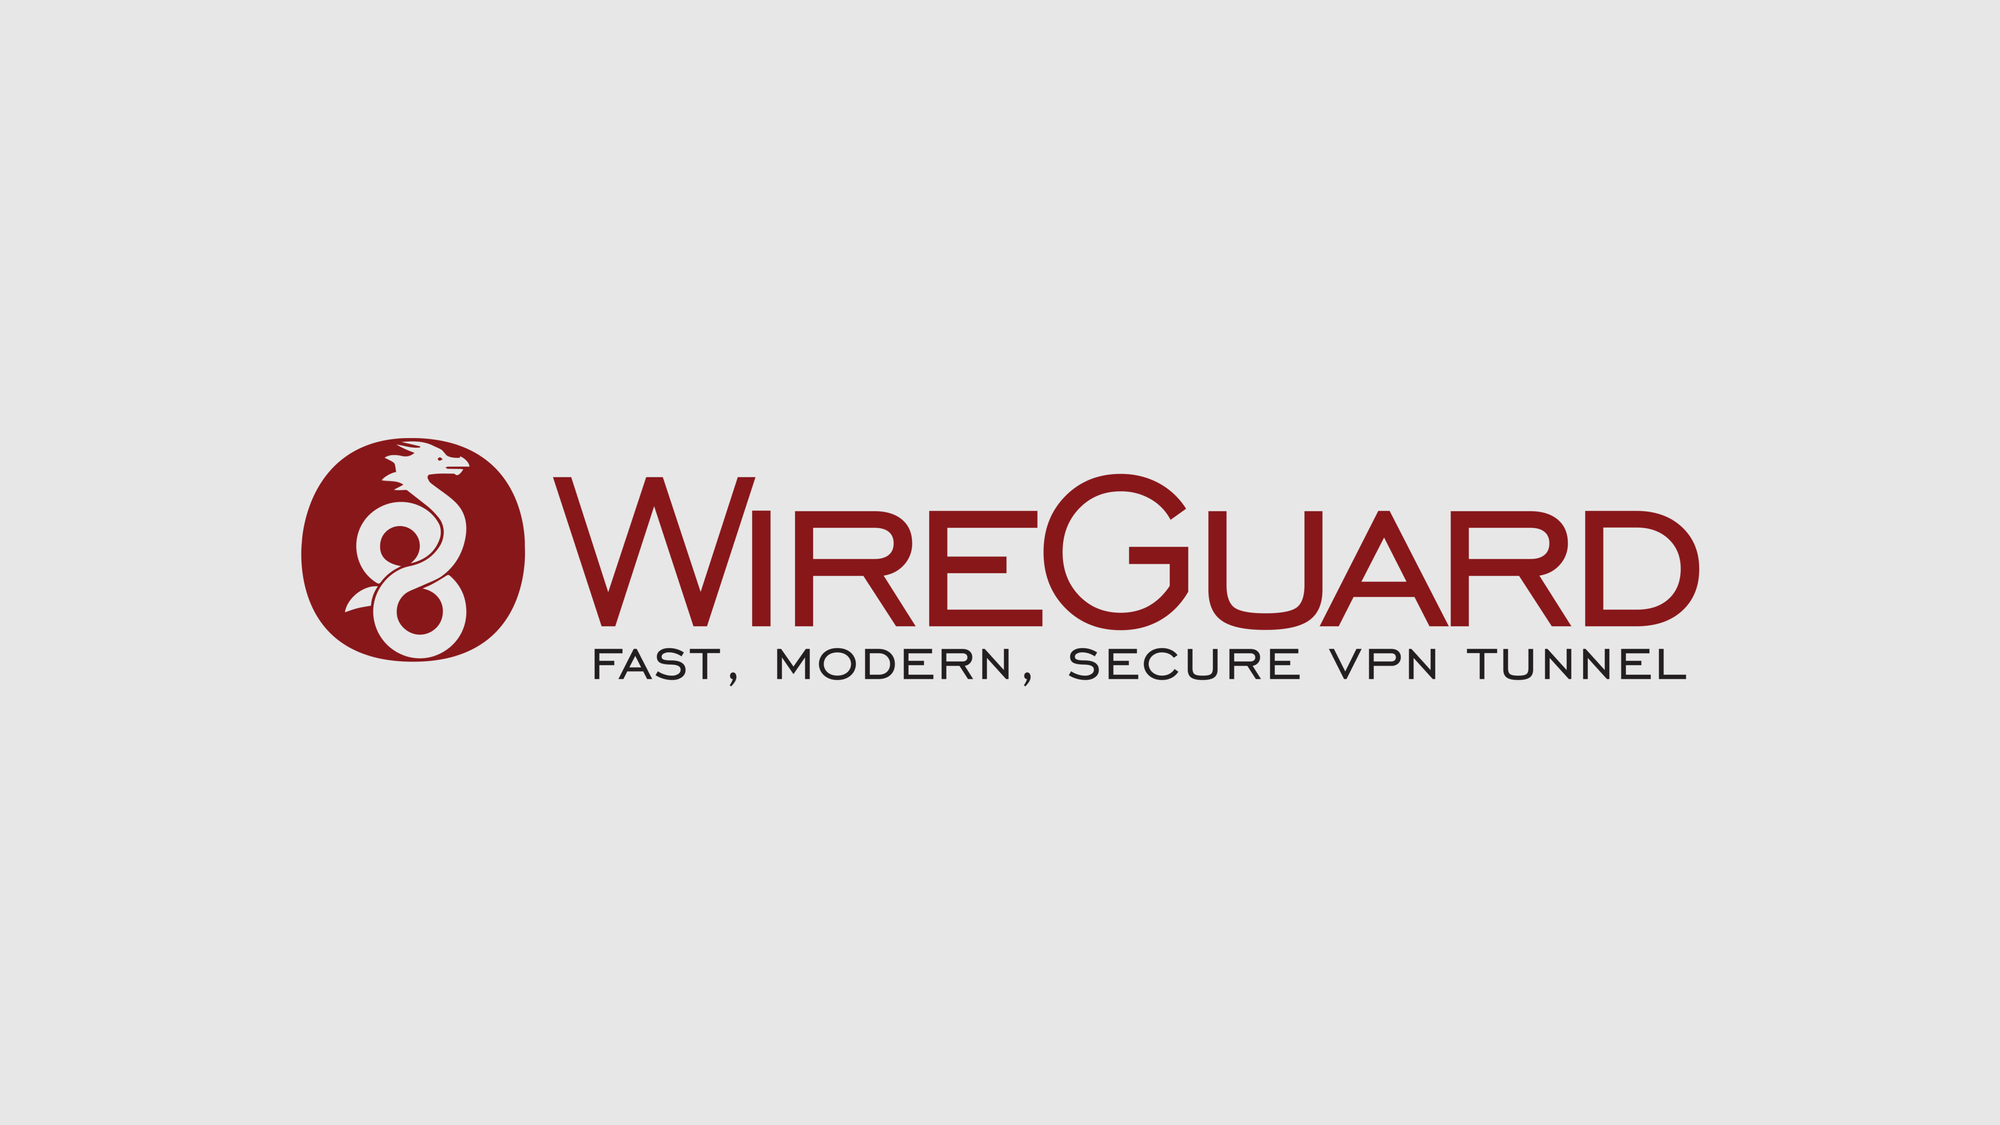 Connect an Ubuntu client to OPNsense WireGuard tunnel with a GUI toggle in Gnome